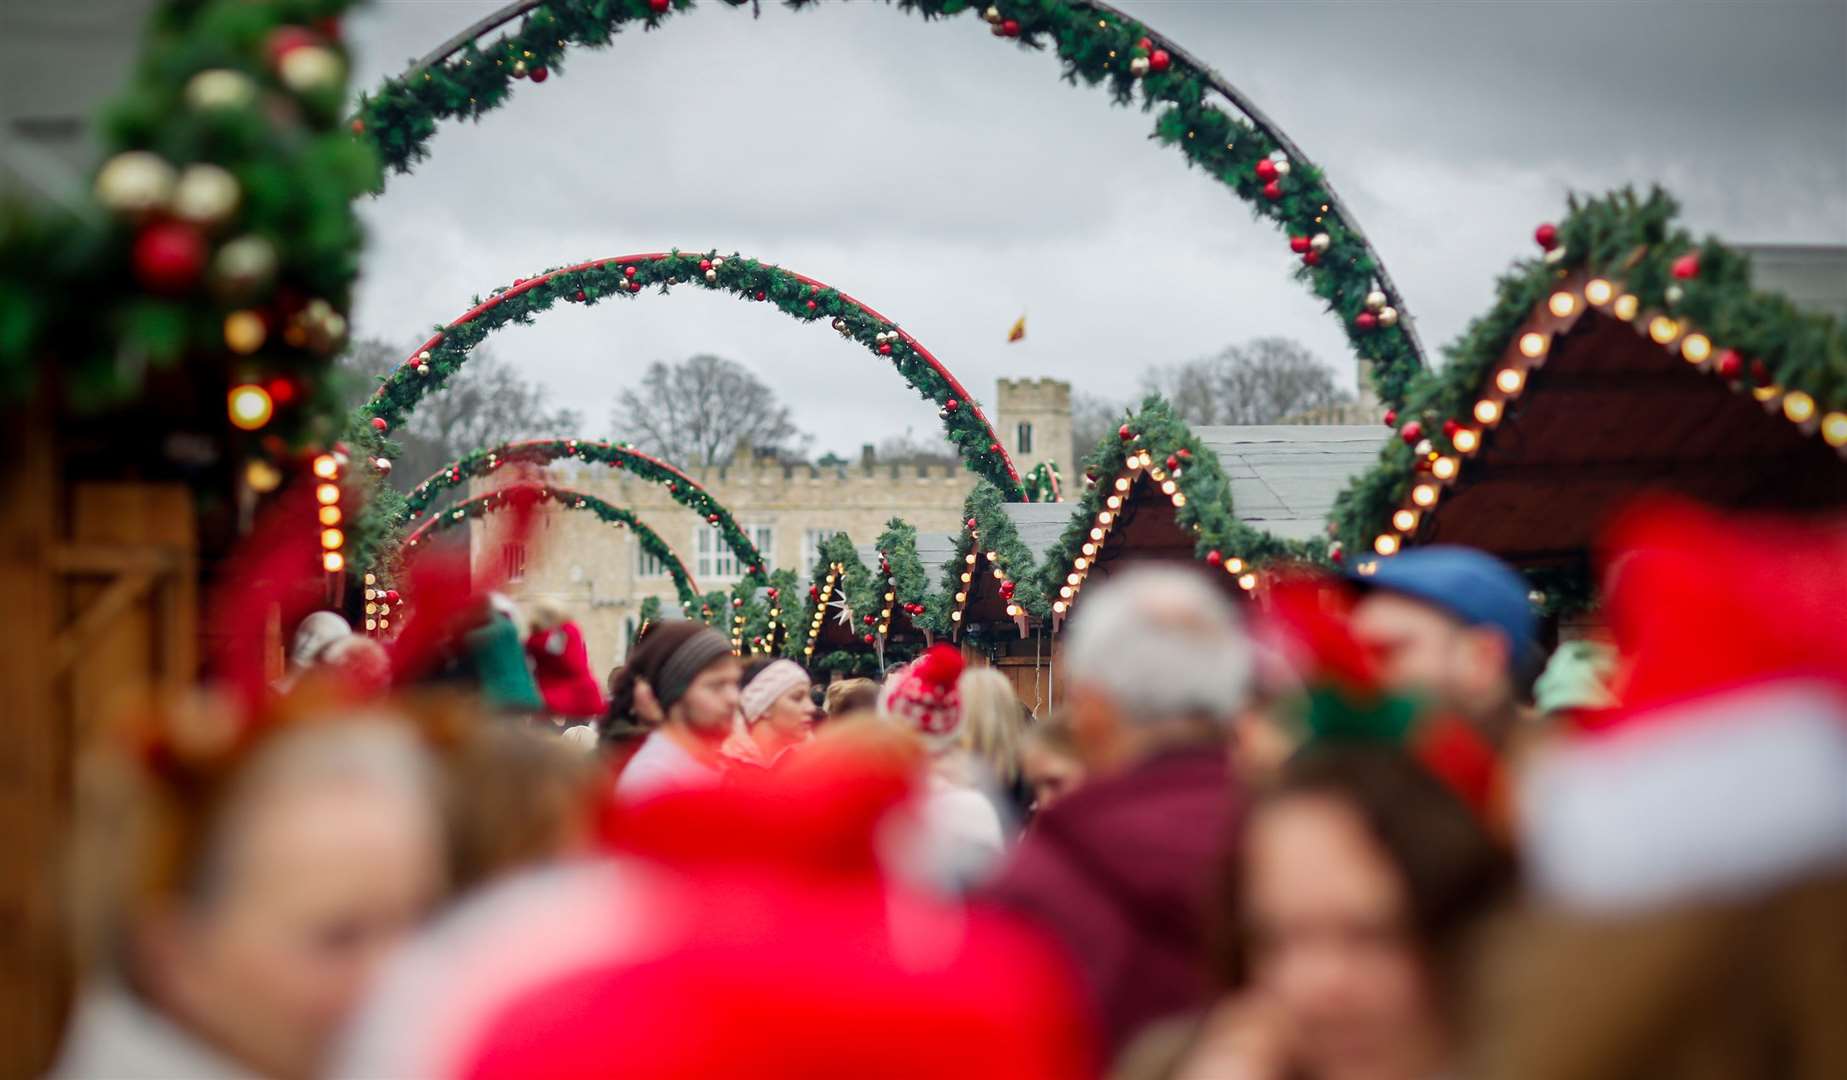 Leeds Castle market and decorations in the castle Picture: www.matthewwalkerphotography.com